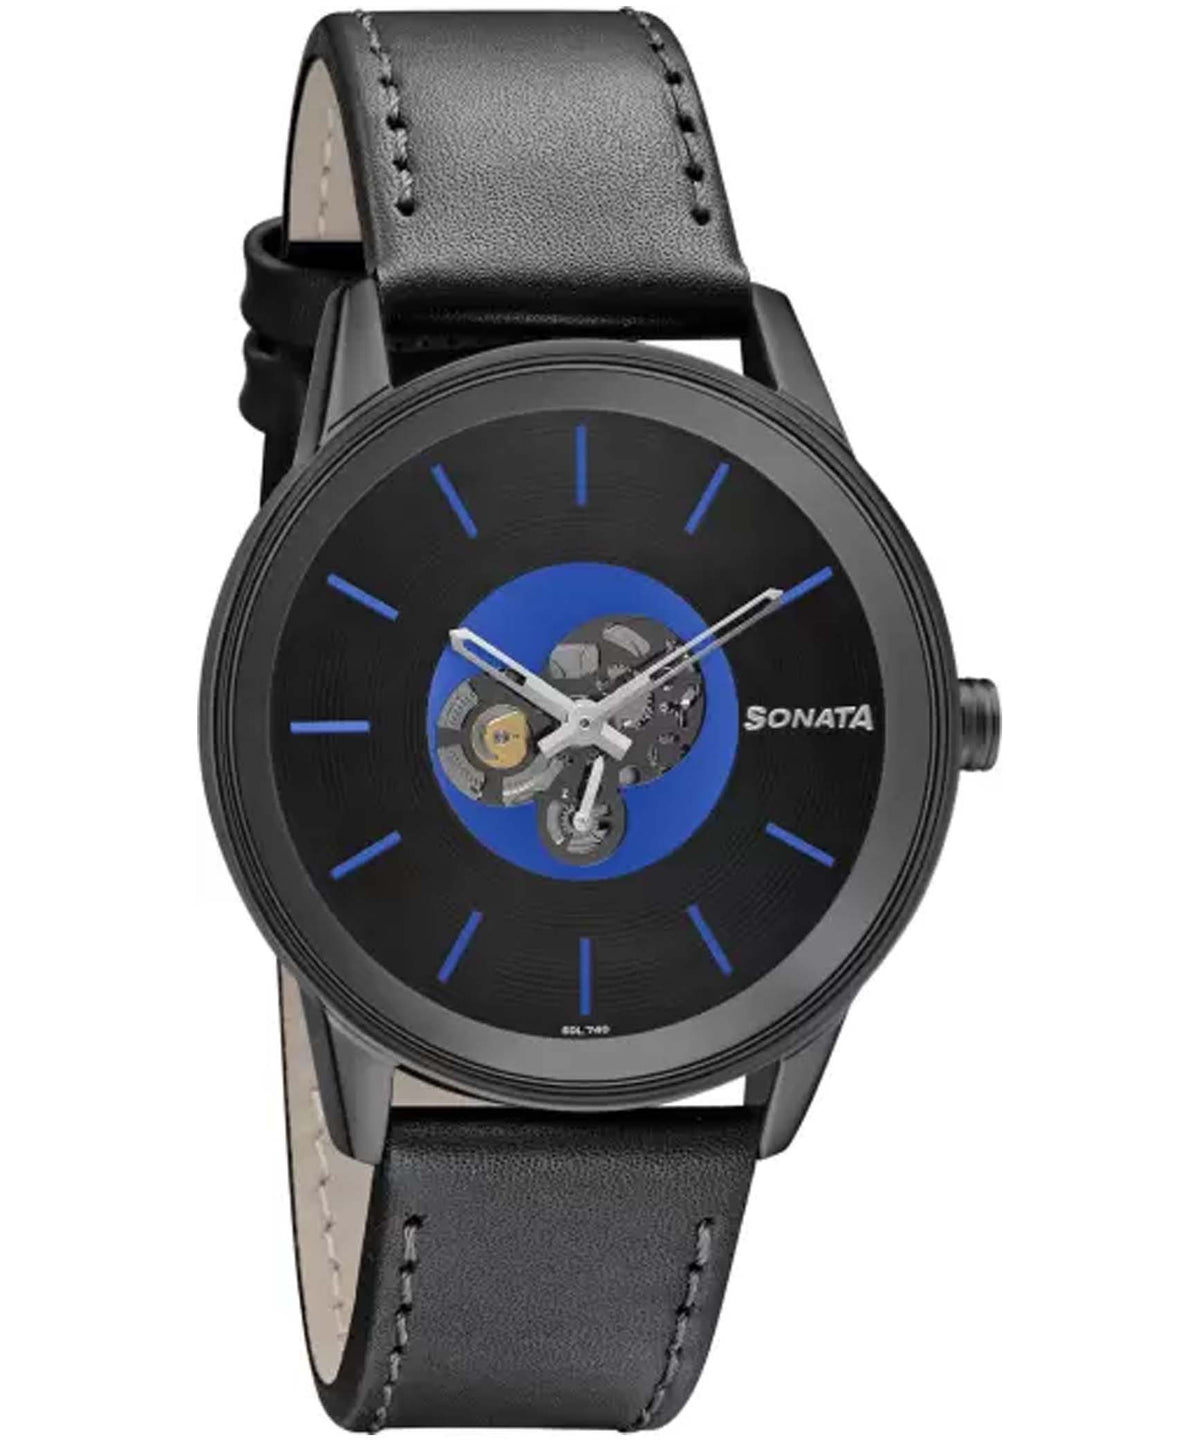 Sonata Men's Unveil Watch with Blue Dial & Black Leather Strap Watch, 7133NL03